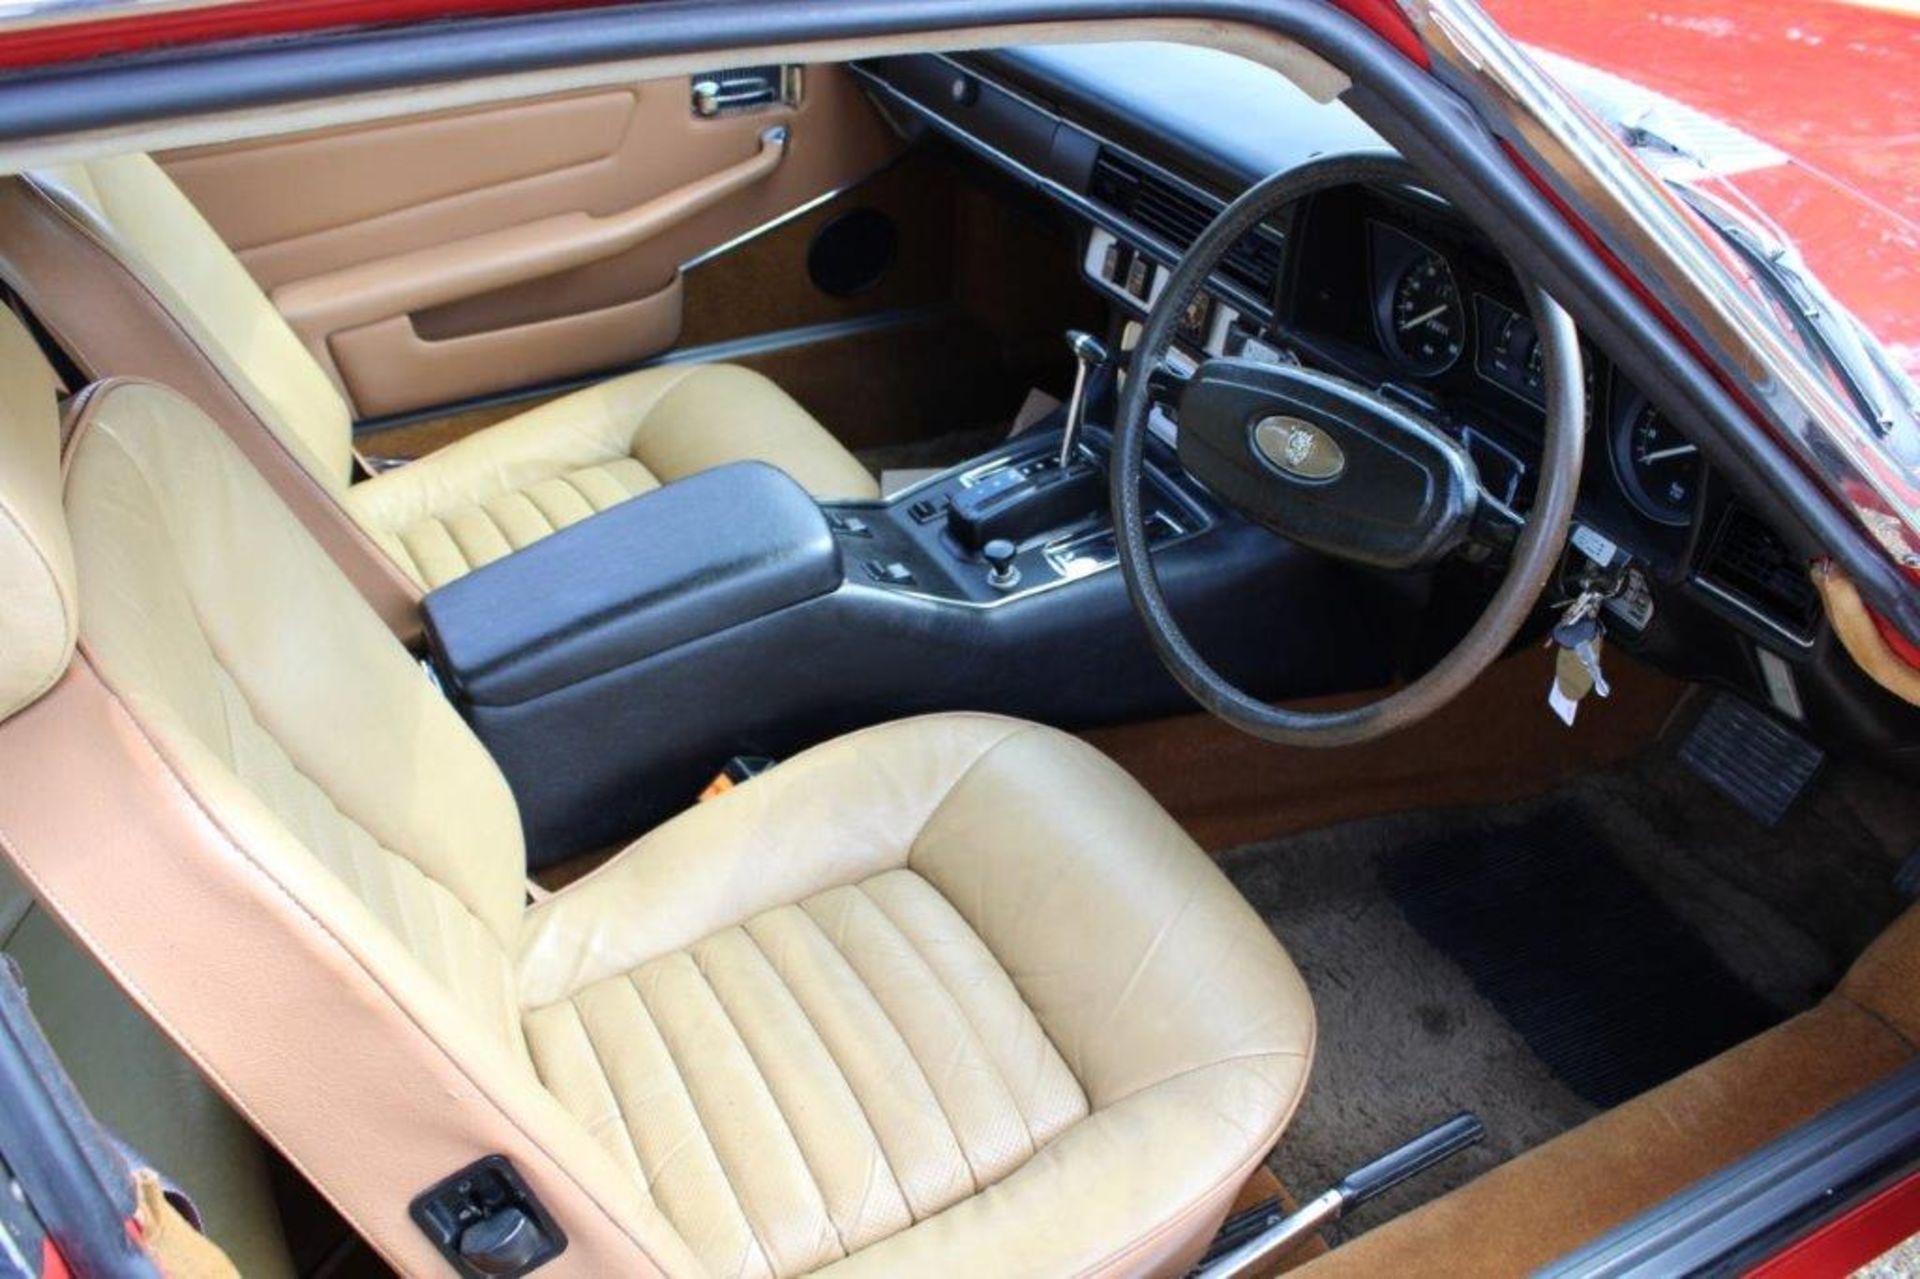 1976 Jaguar XJ-S 5.3 V12 Coupe Auto 29,030 miles from new - Image 15 of 28